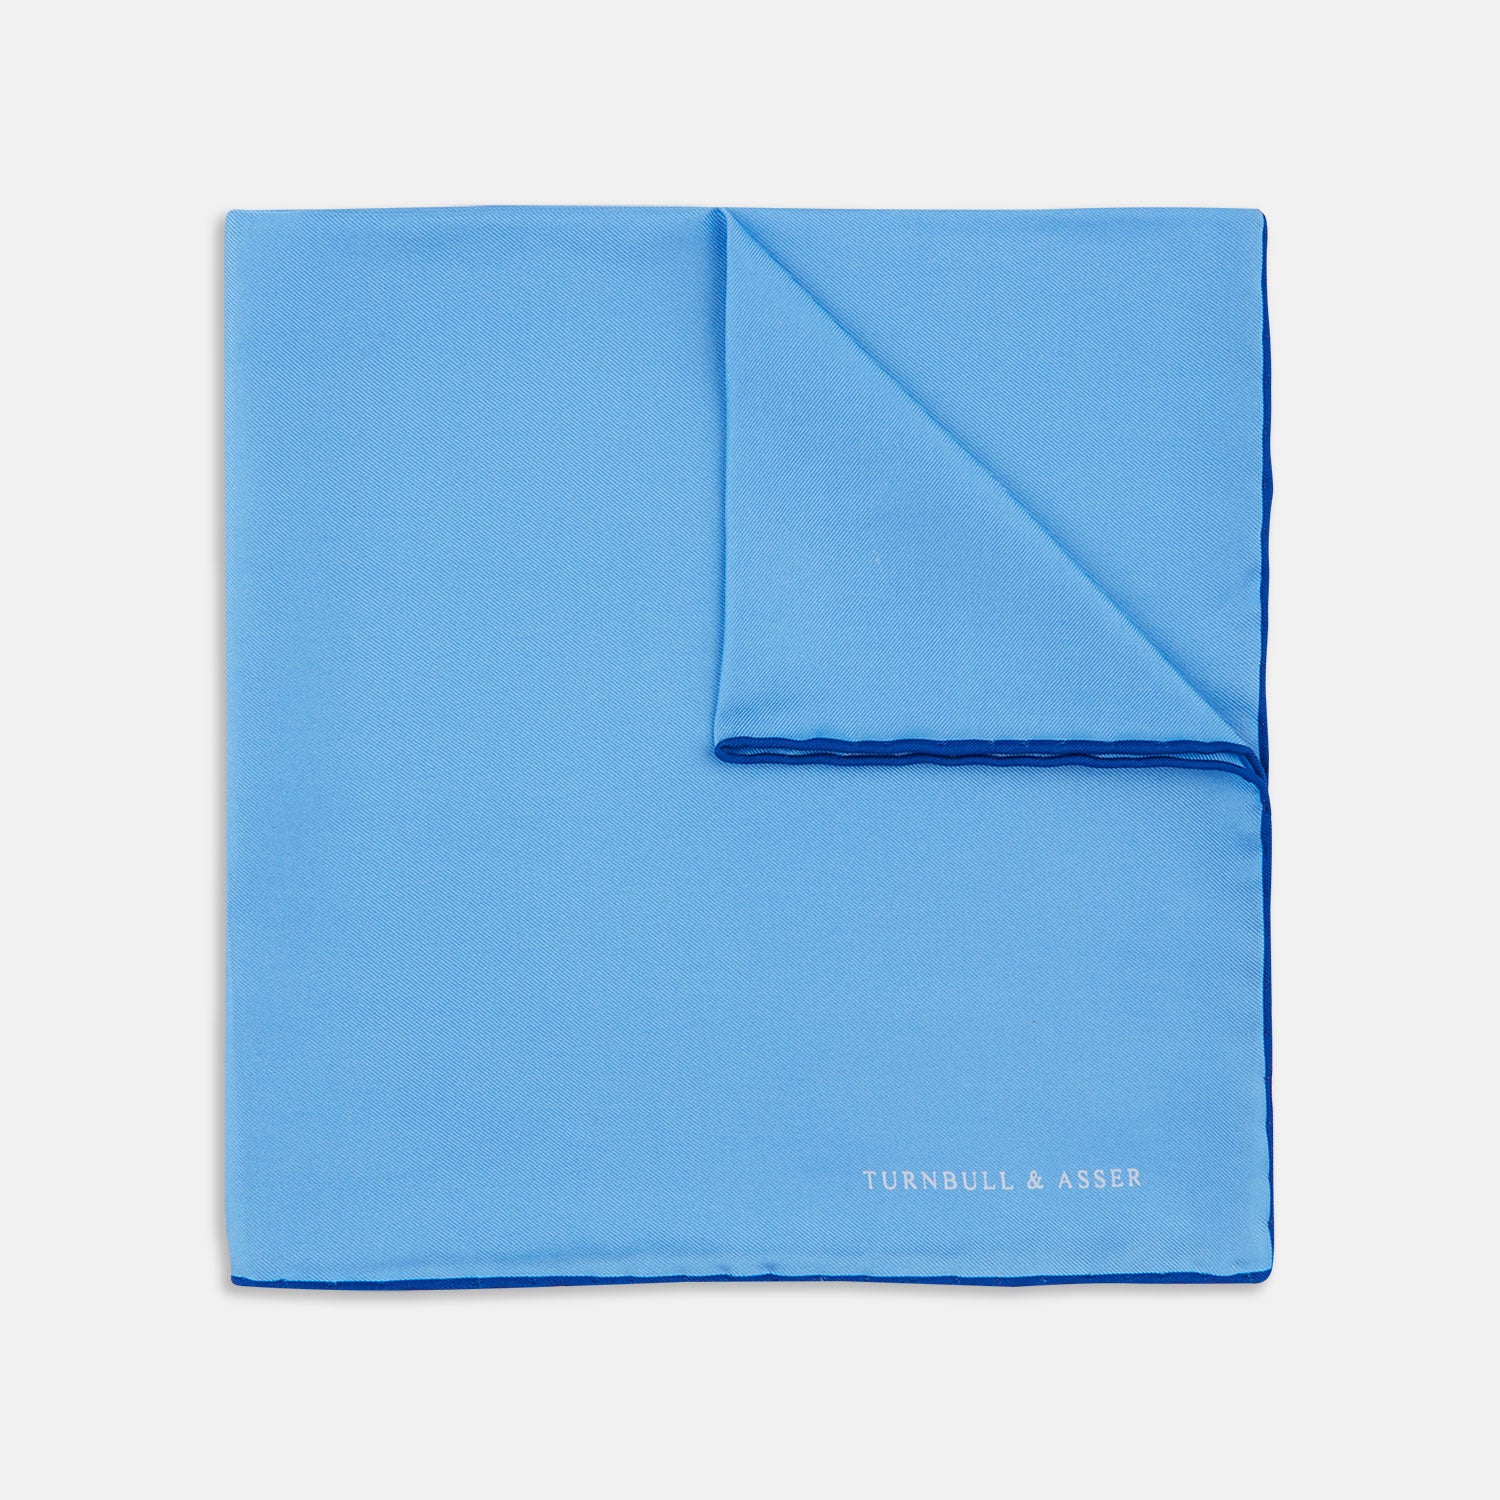 Light Blue and Navy Piped Silk Pocket Square